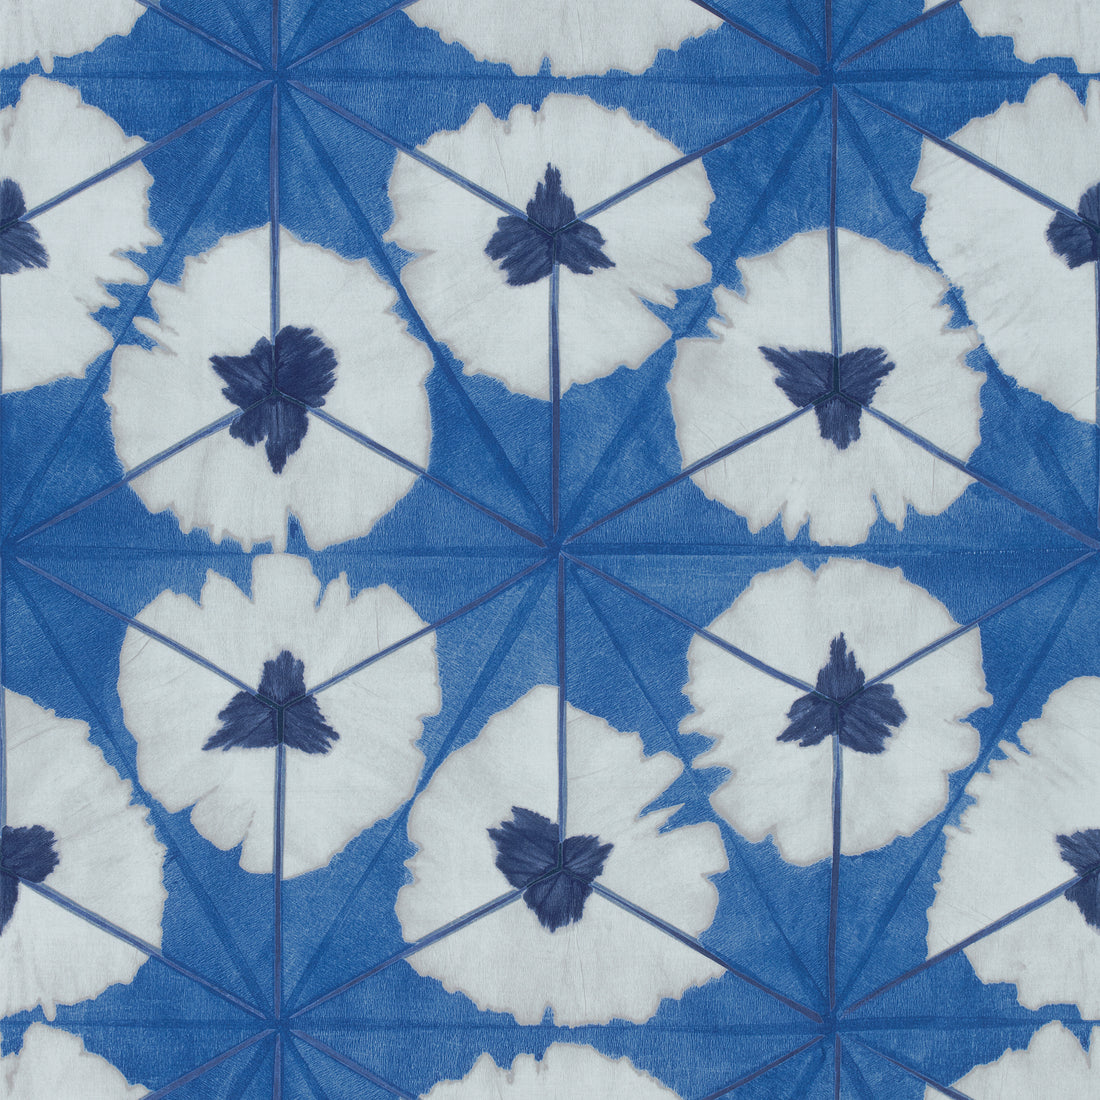 Sunburst fabric in navy color - pattern number F913093 - by Thibaut in the Summer House collection